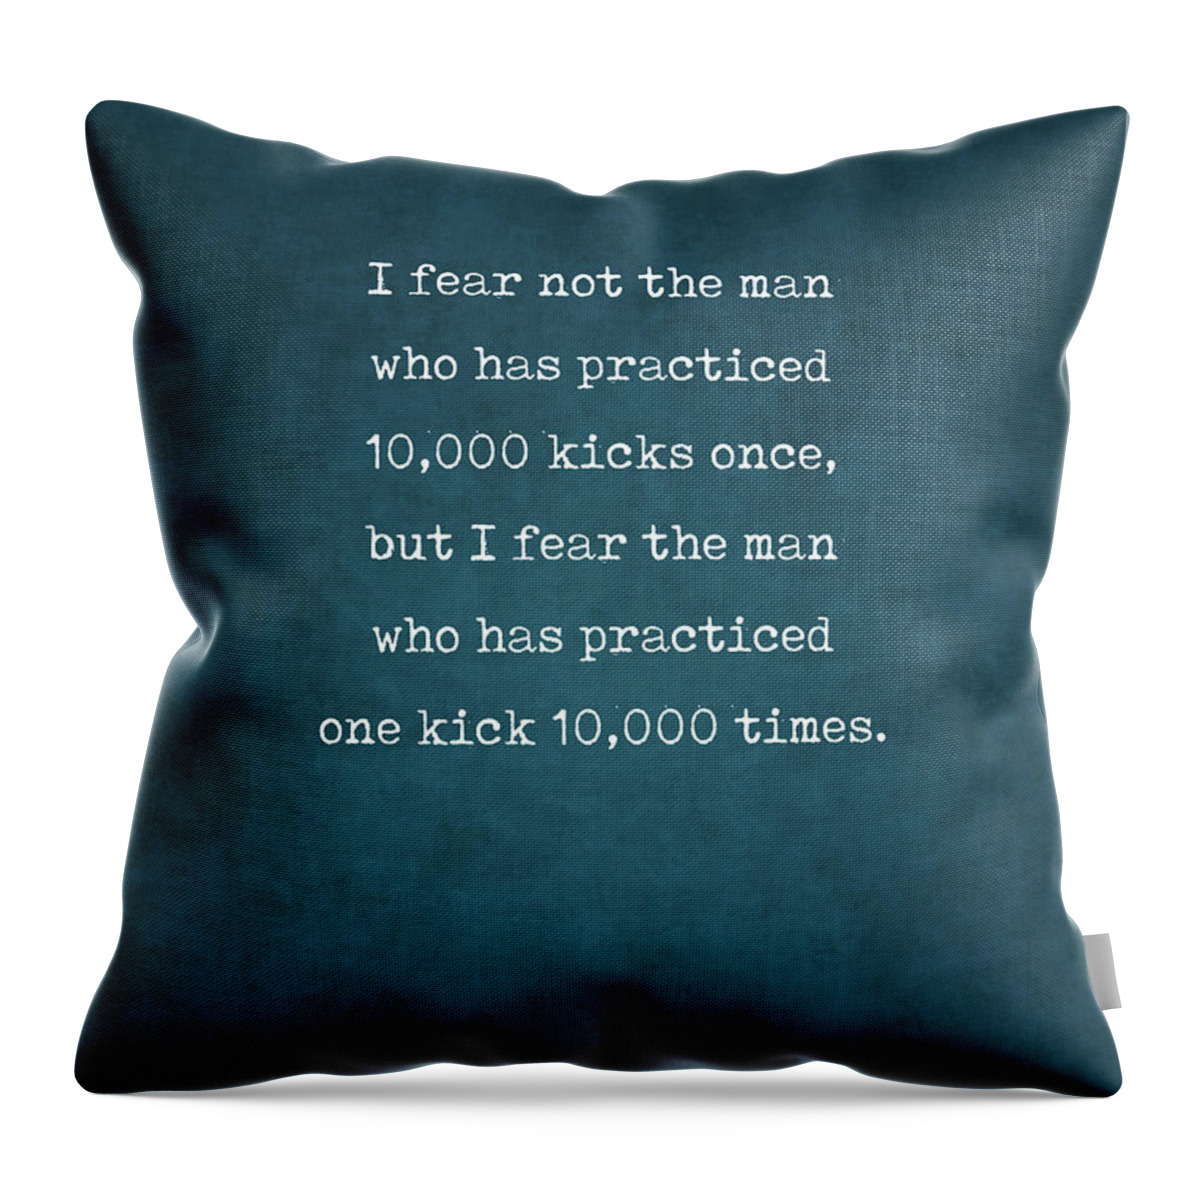 Bruce Lee Throw Pillow featuring the digital art One Kick 10000 Times - Bruce Lee Quote 2 - Motivational, Inspiring Print #2 by Studio Grafiikka